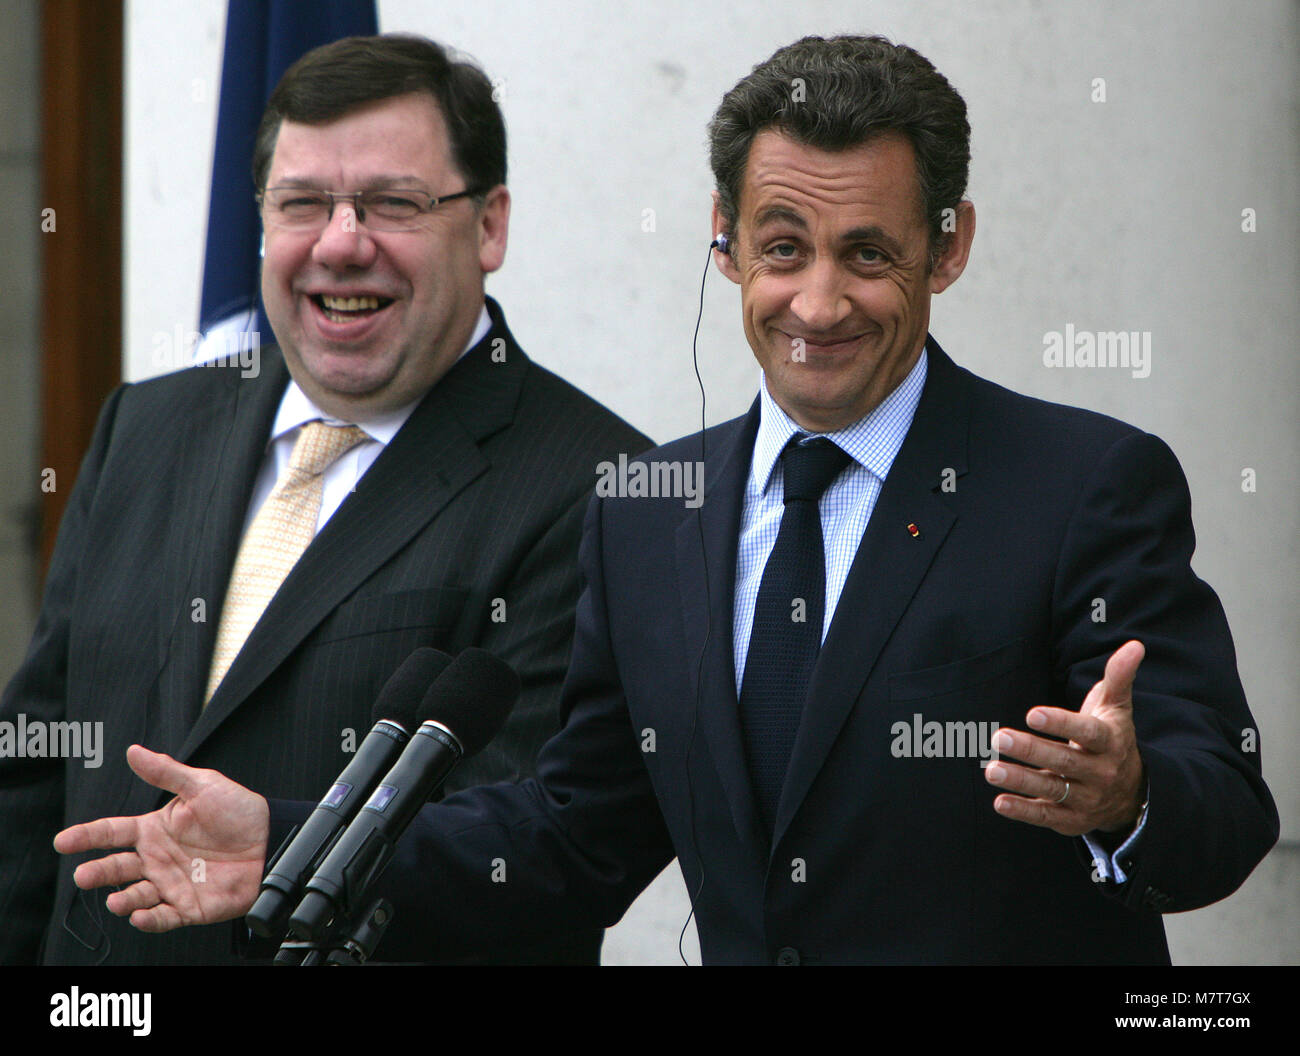 French President Nicolas Sarkozy speaks to the media alongside Taoiseach Brian Cowen at Government Buildings in Dublin, Monday 21, July 2008. Sarkozy met the two main opposition leaders - Fine Gael's Enda Kenny and Labour's Eamon Gilmore and talks with groups who opposed and supported the Lisbon Treaty. Photo/Paul McErlane Stock Photo